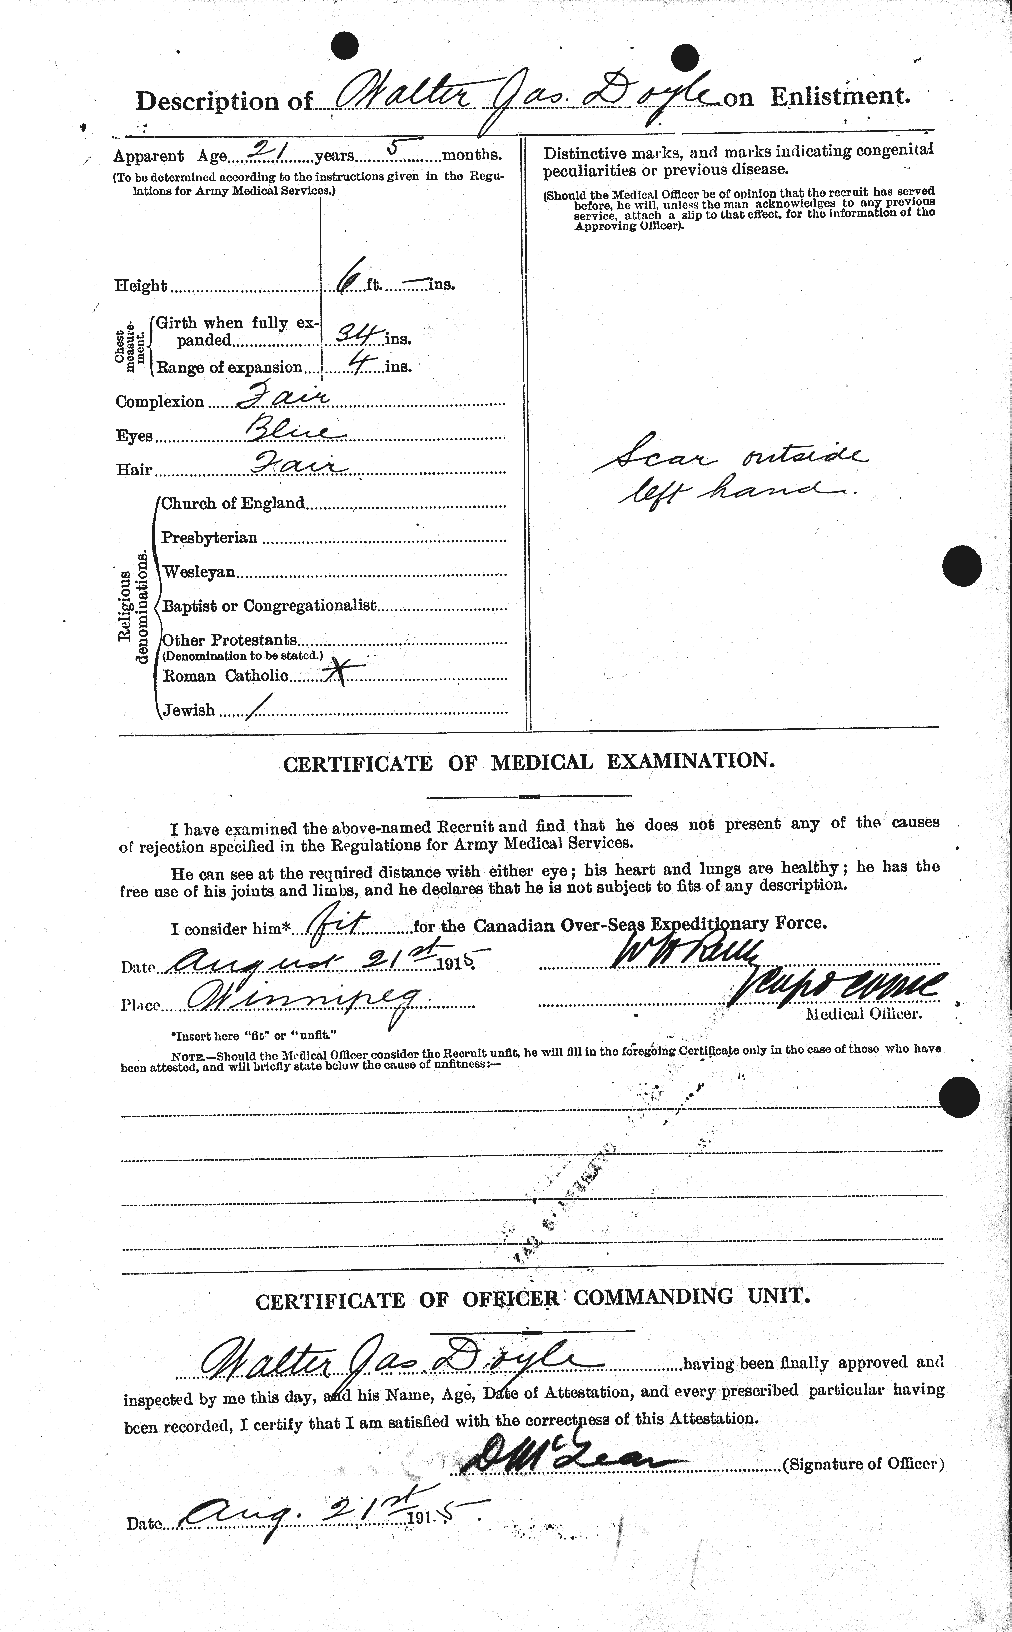 Personnel Records of the First World War - CEF 297932b